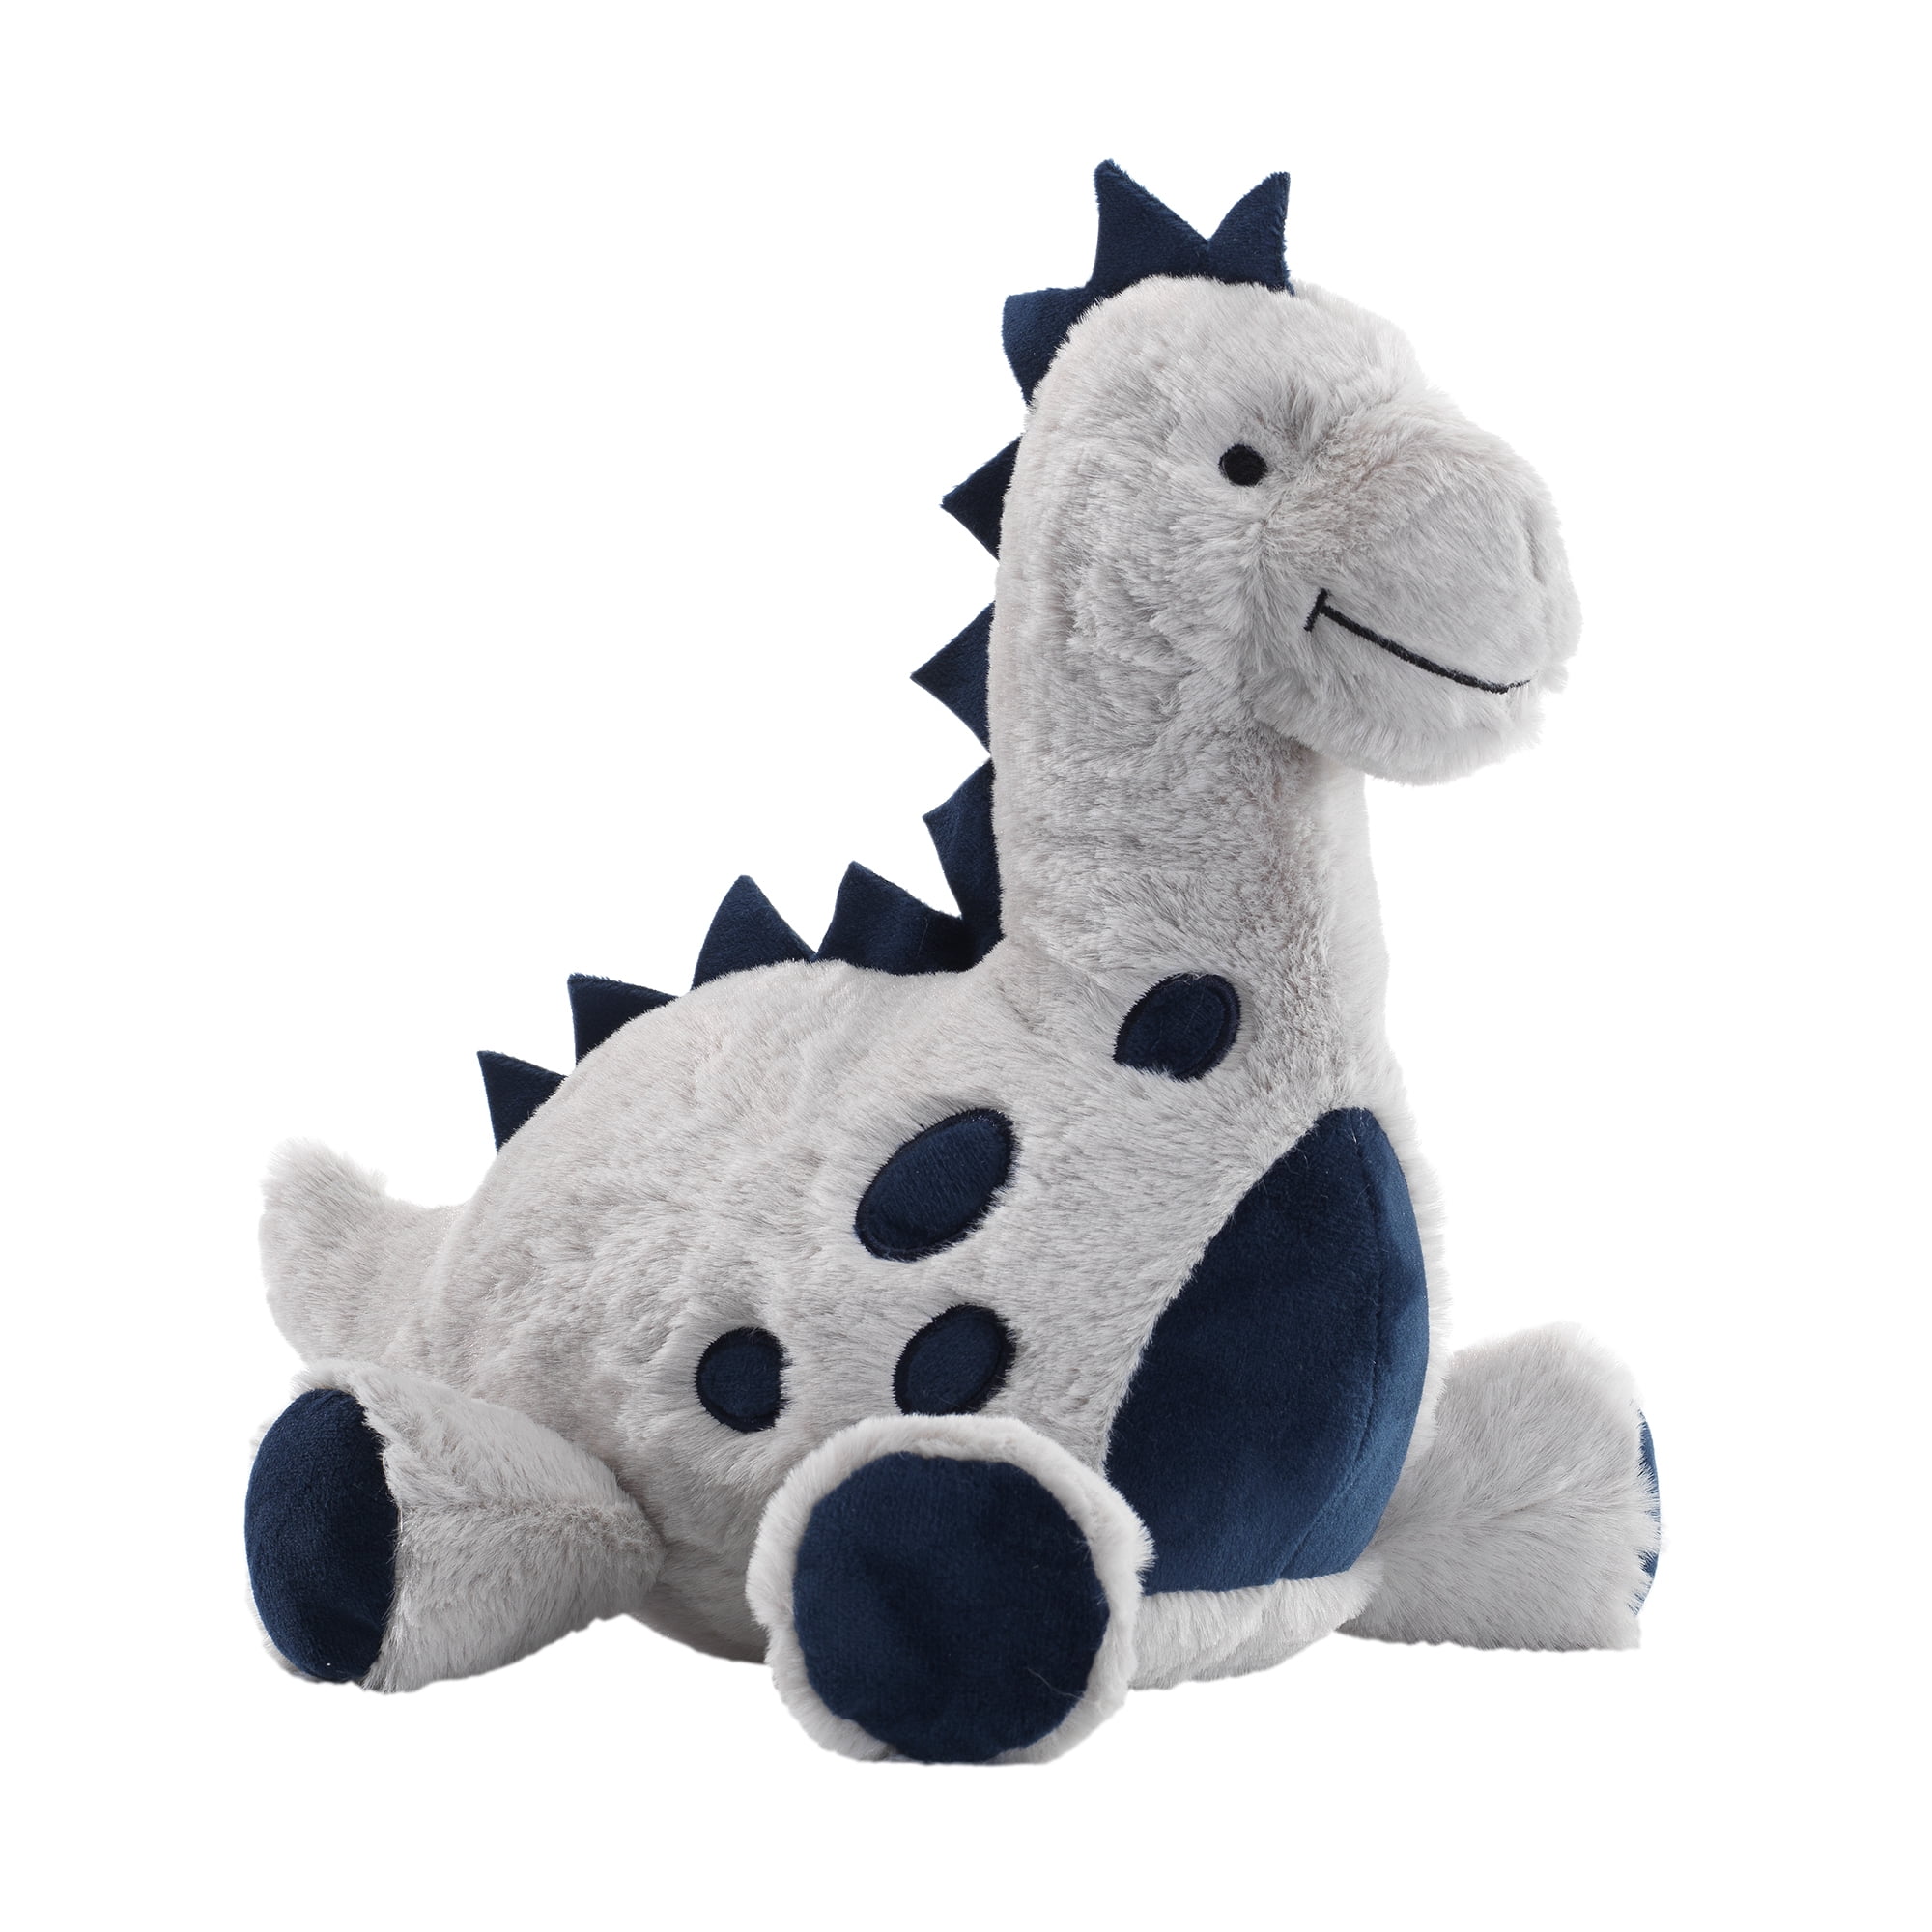 Blue Plush Little Miracles Dinosaur Soft Baby Triceratops Lovey Security T1 